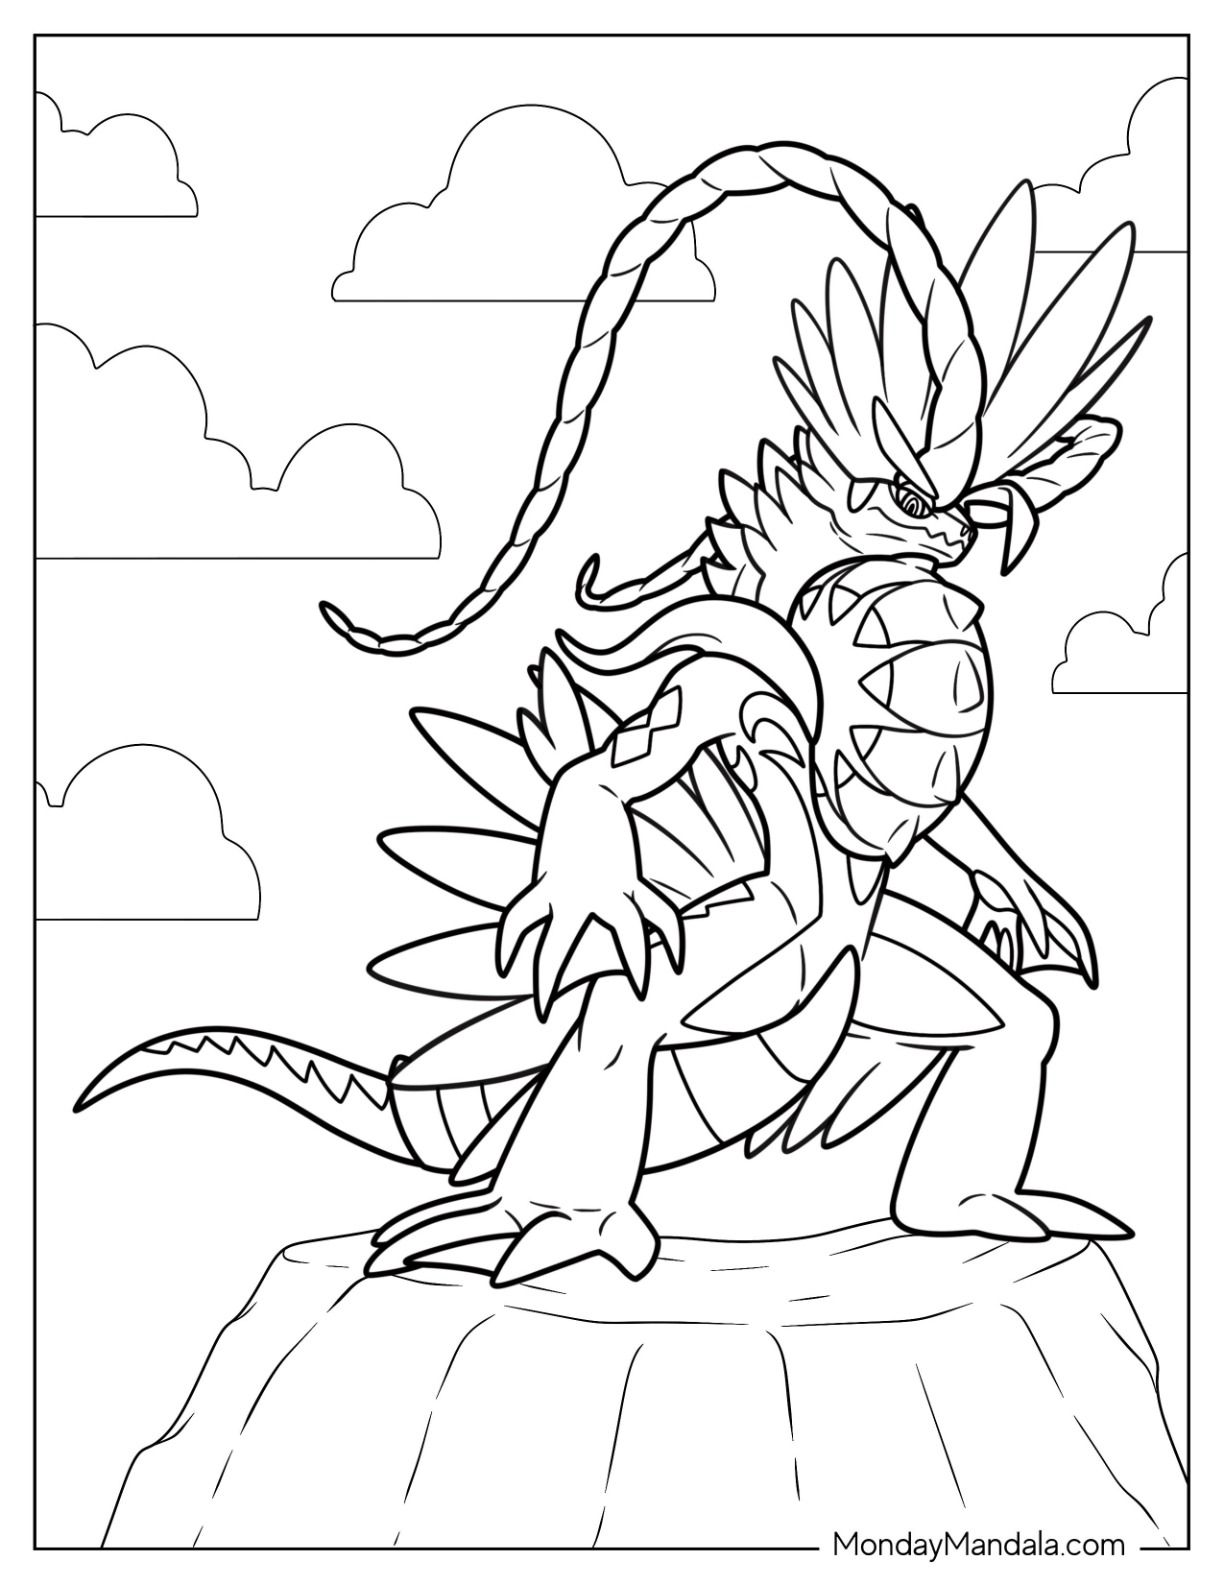 Legendary pokemon coloring pages free pdf printables pokemon coloring pages coloring pages pokemon coloring